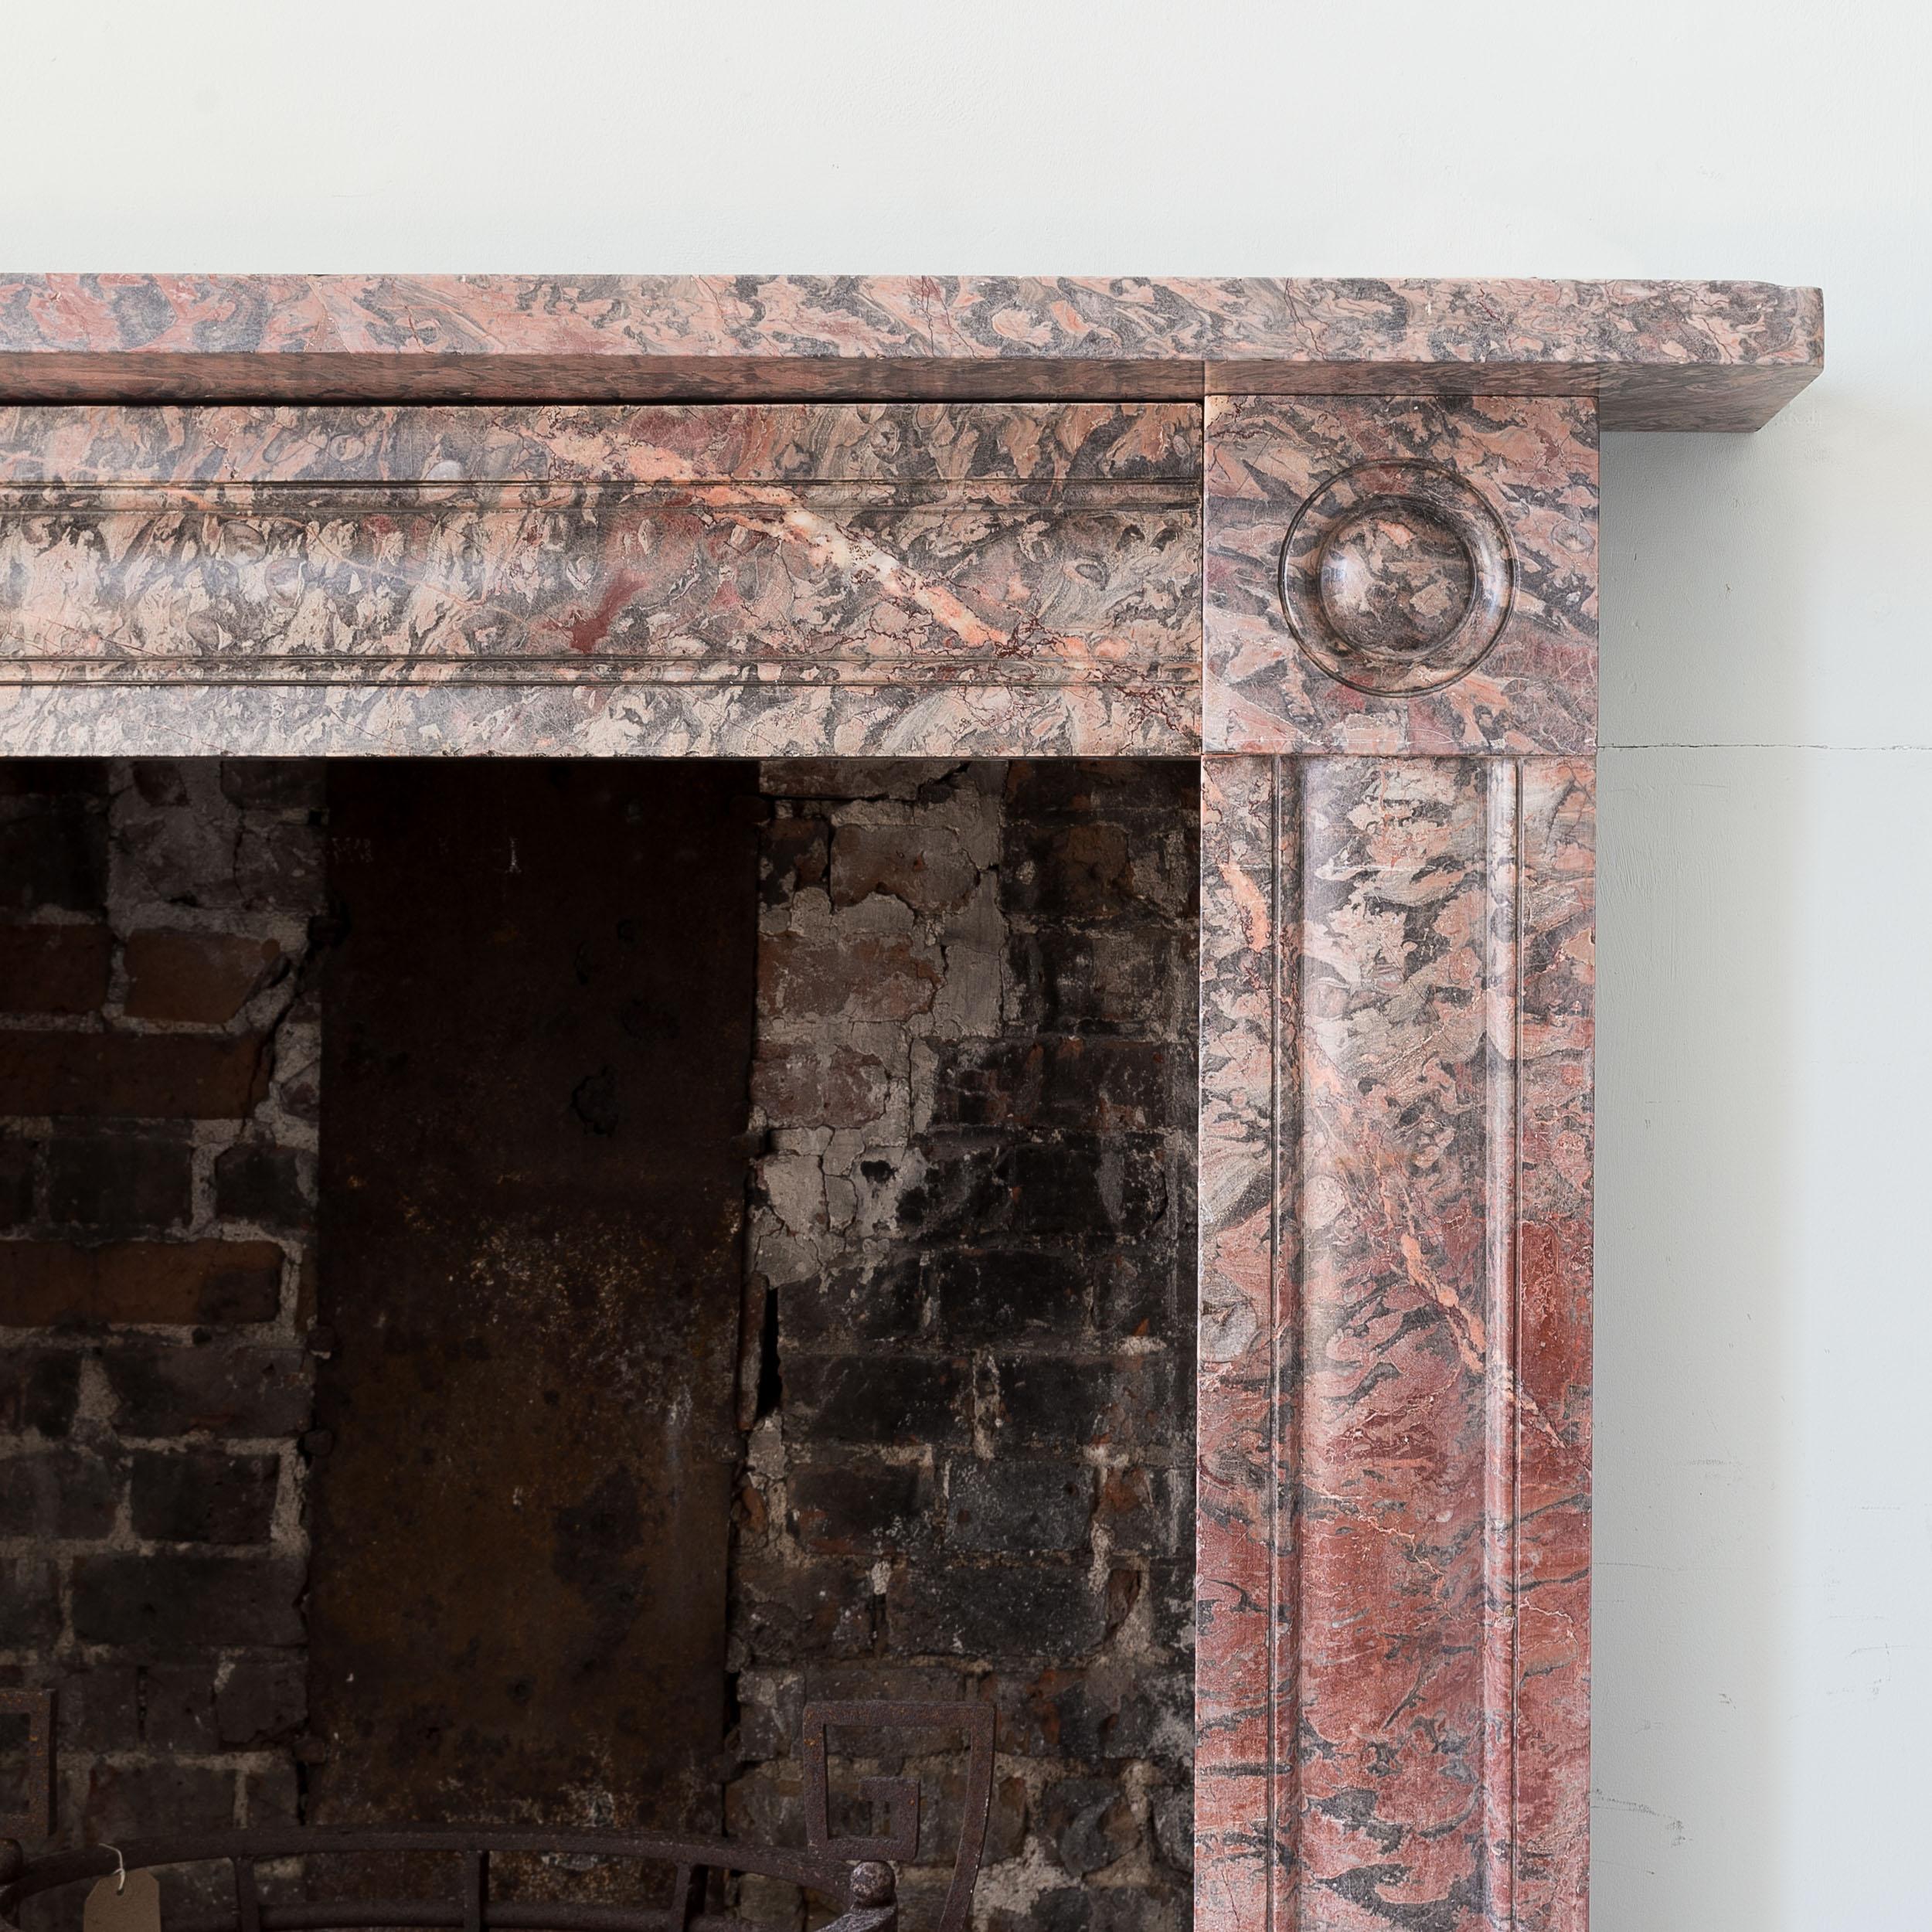 An English Regency period Devonian limestone fireplace, c.1820, with cushion moulded frieze and jambs, the corner-blocks with bull's-eye roundels, on square footblocks, realised in well figured material with good varied colouration.

Opening width